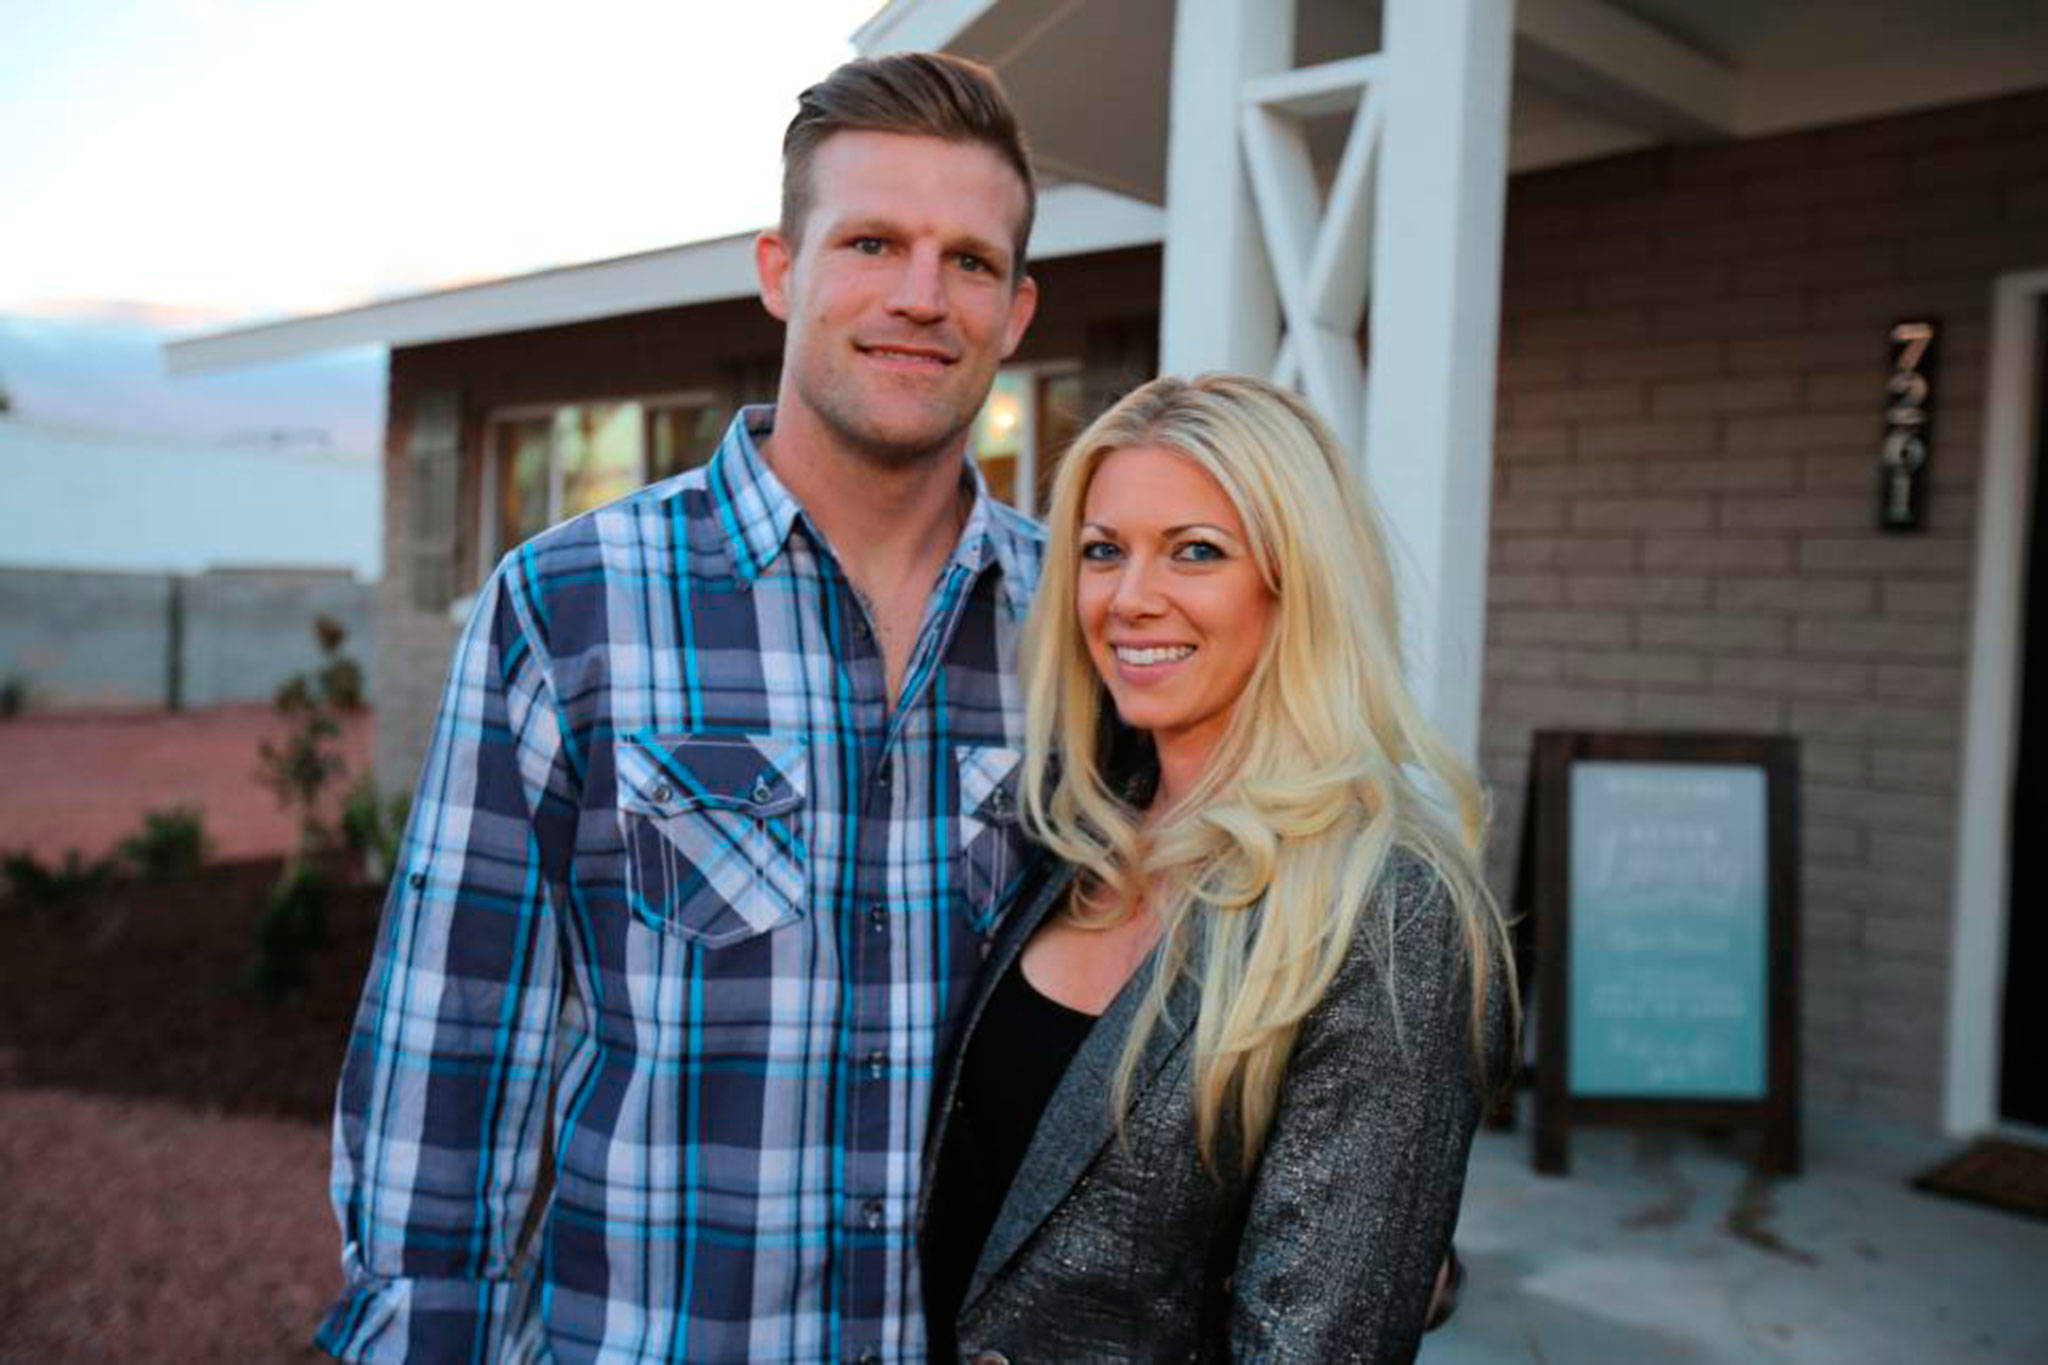 Bristol and Aubrey Marunde star in “Flip or Flop Vegas,” starting Thursday on HGTV. Bristol, an MMA fighter and Sequim grad, moved to Las Vegas years ago to pursue fighting, and after dating Aubrey, they began flipping homes together. (HGTV)